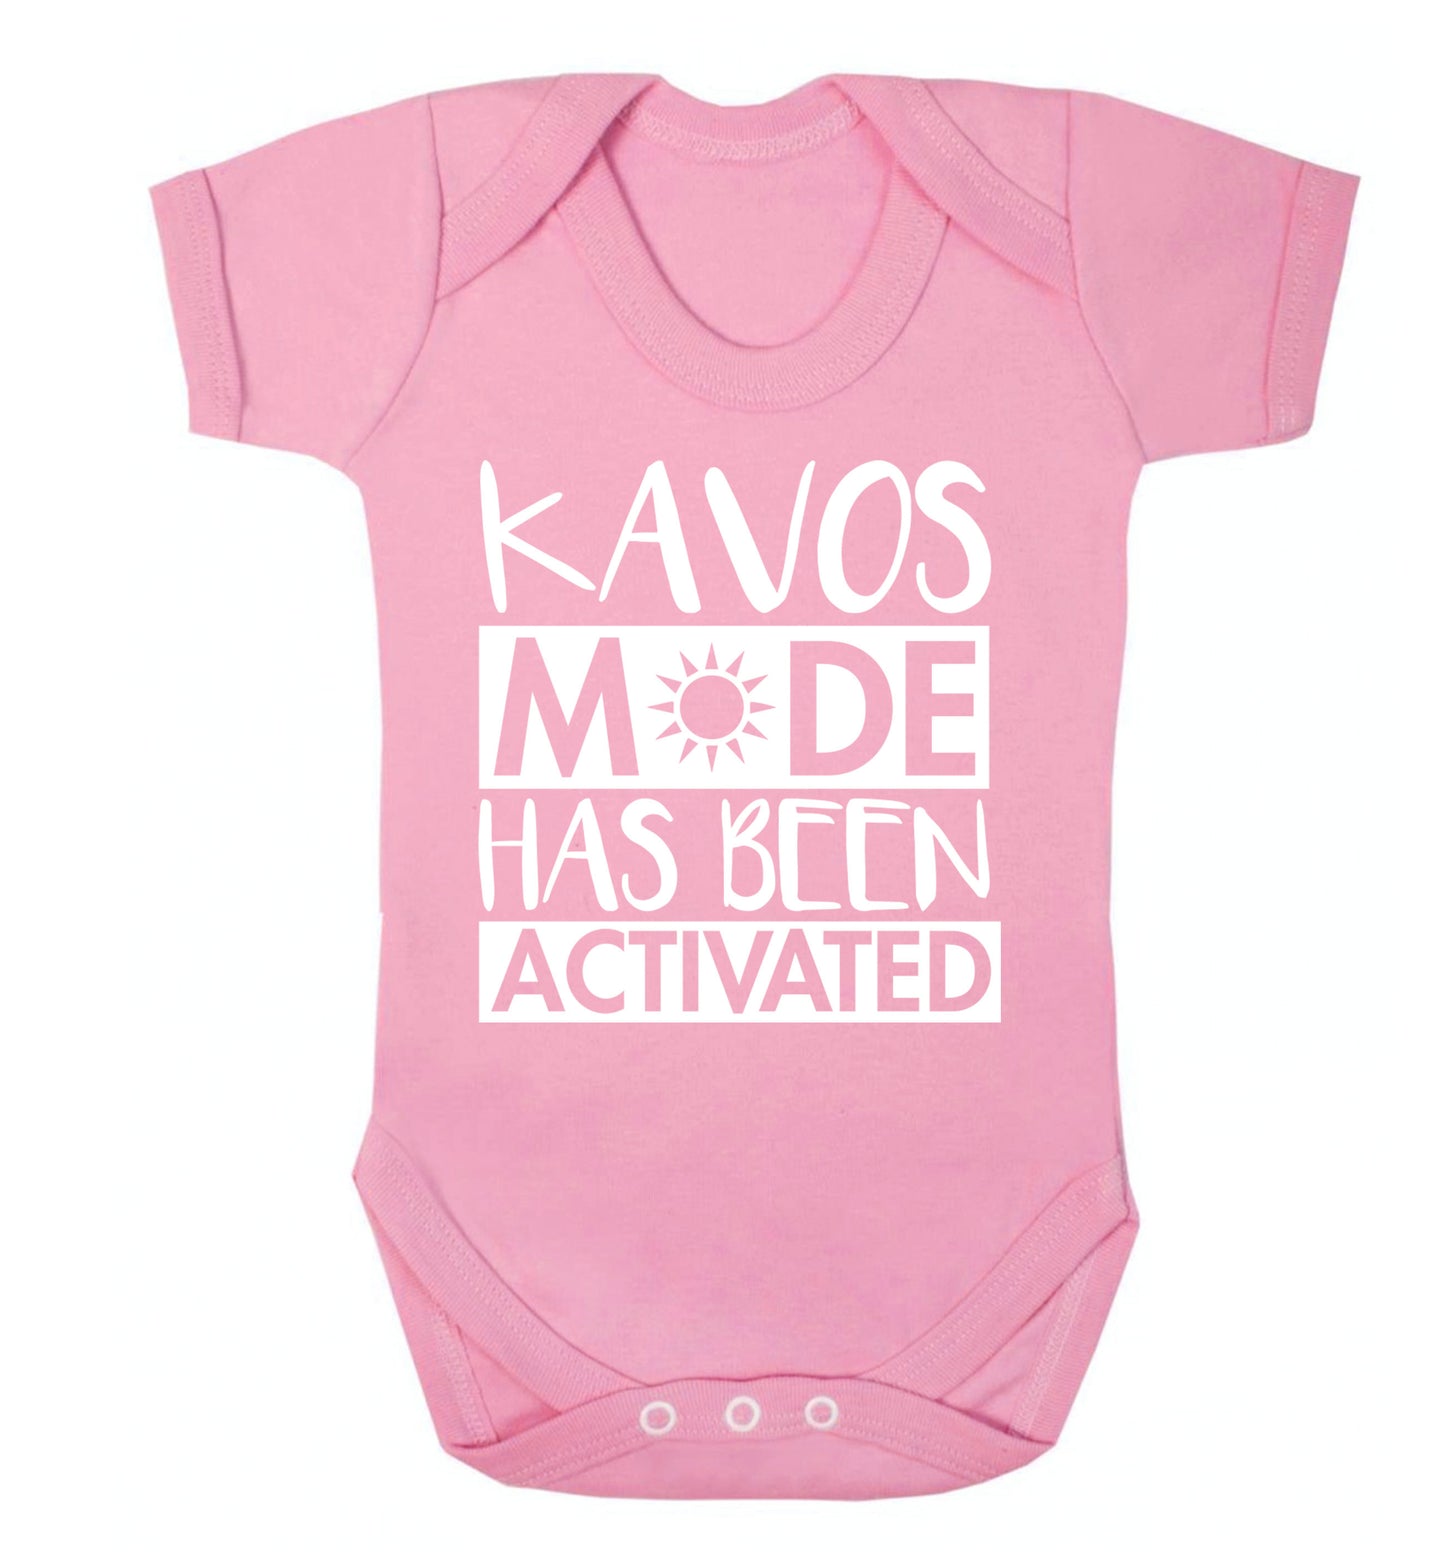 Kavos mode has been activated Baby Vest pale pink 18-24 months